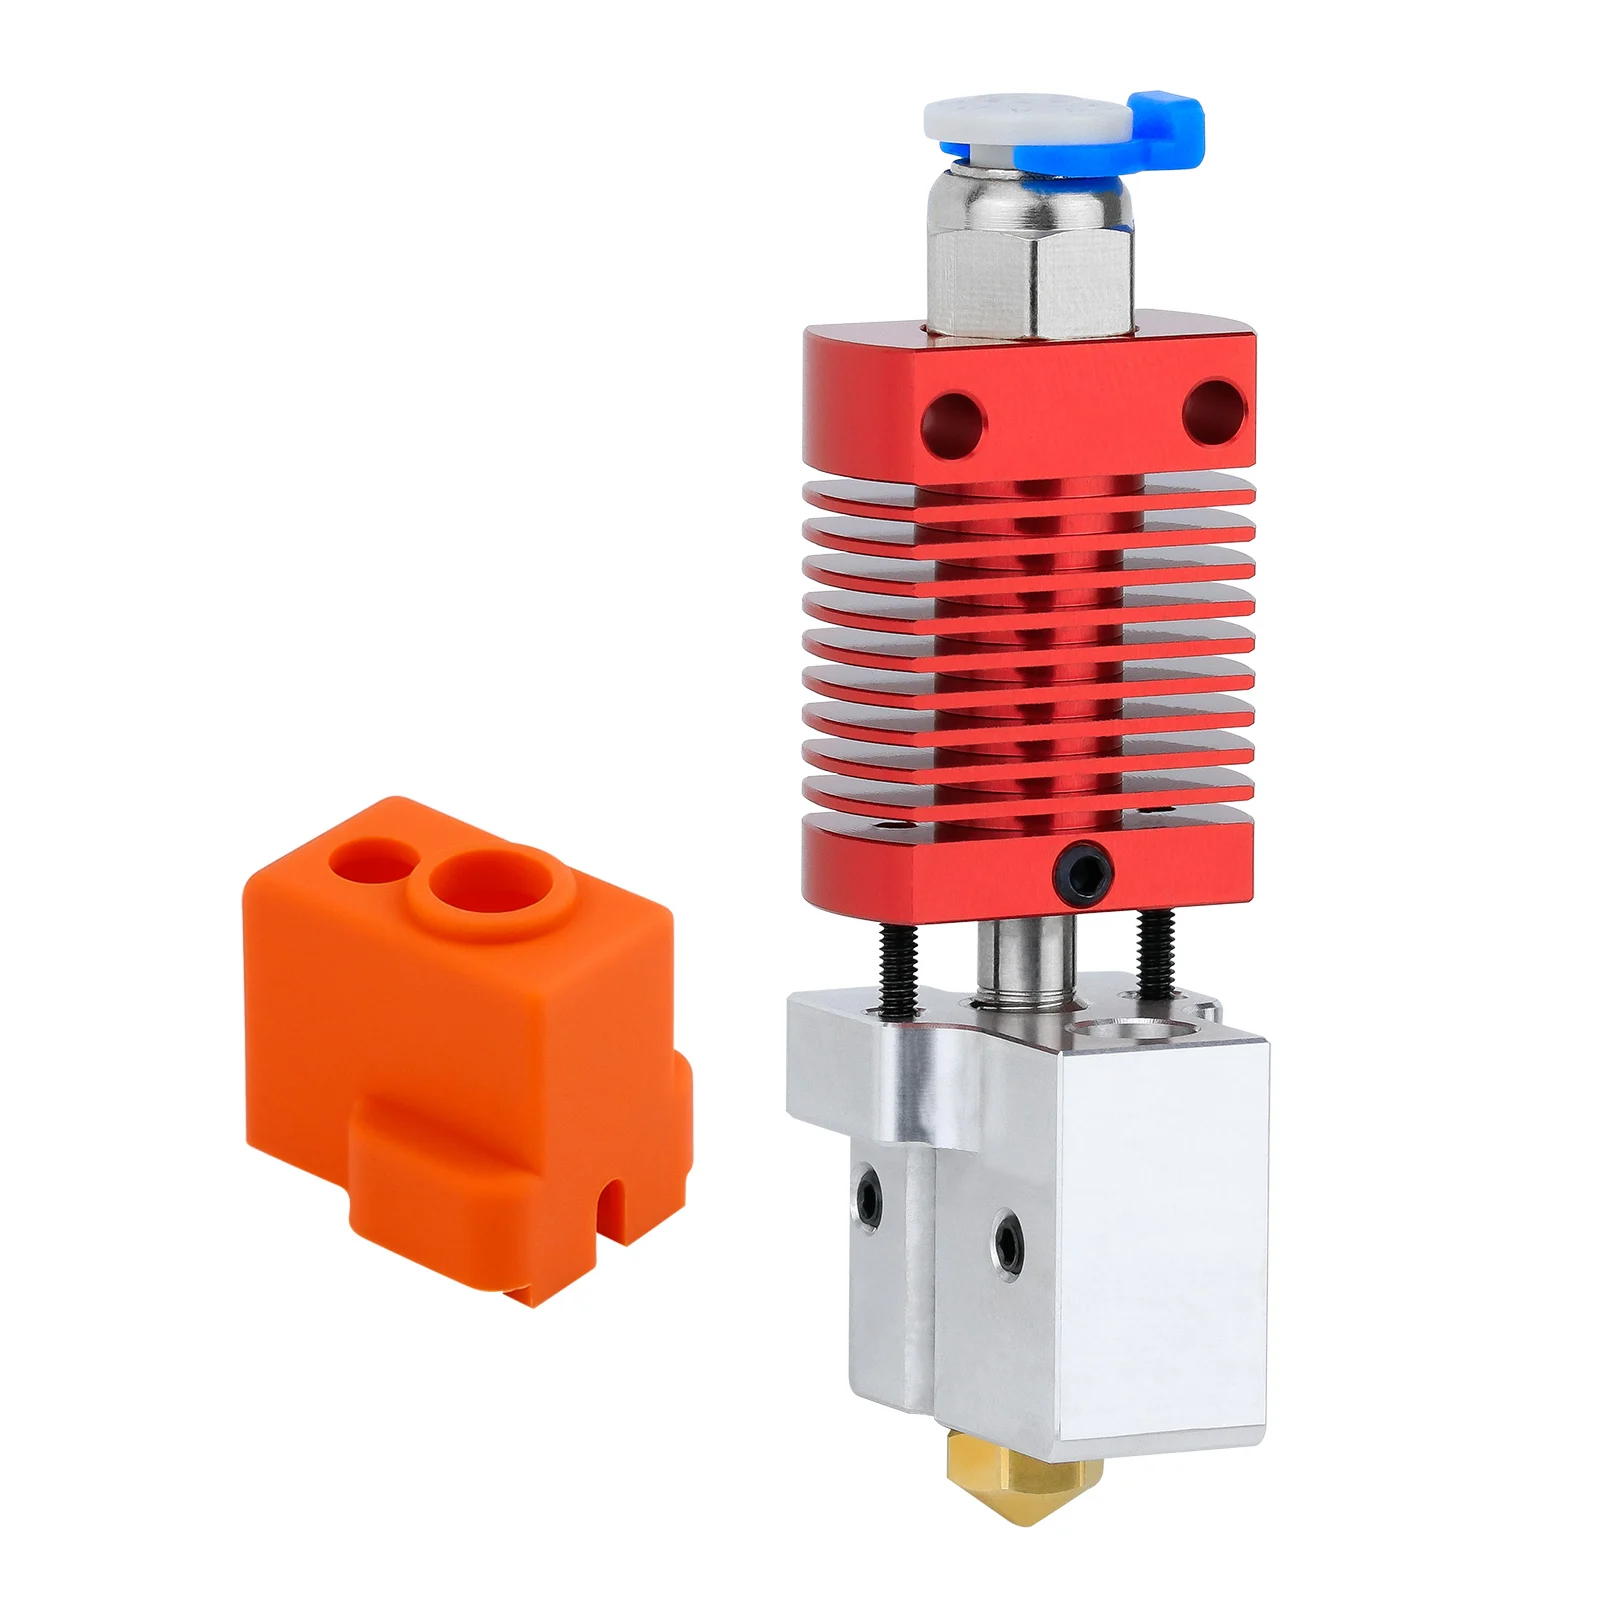 Newest Ender3 High Temperature Hotend Kit Reach To 550℃ Copper Plated Volcano Nozzle Heating Block Bi-Metal Throat CR10 Extruder